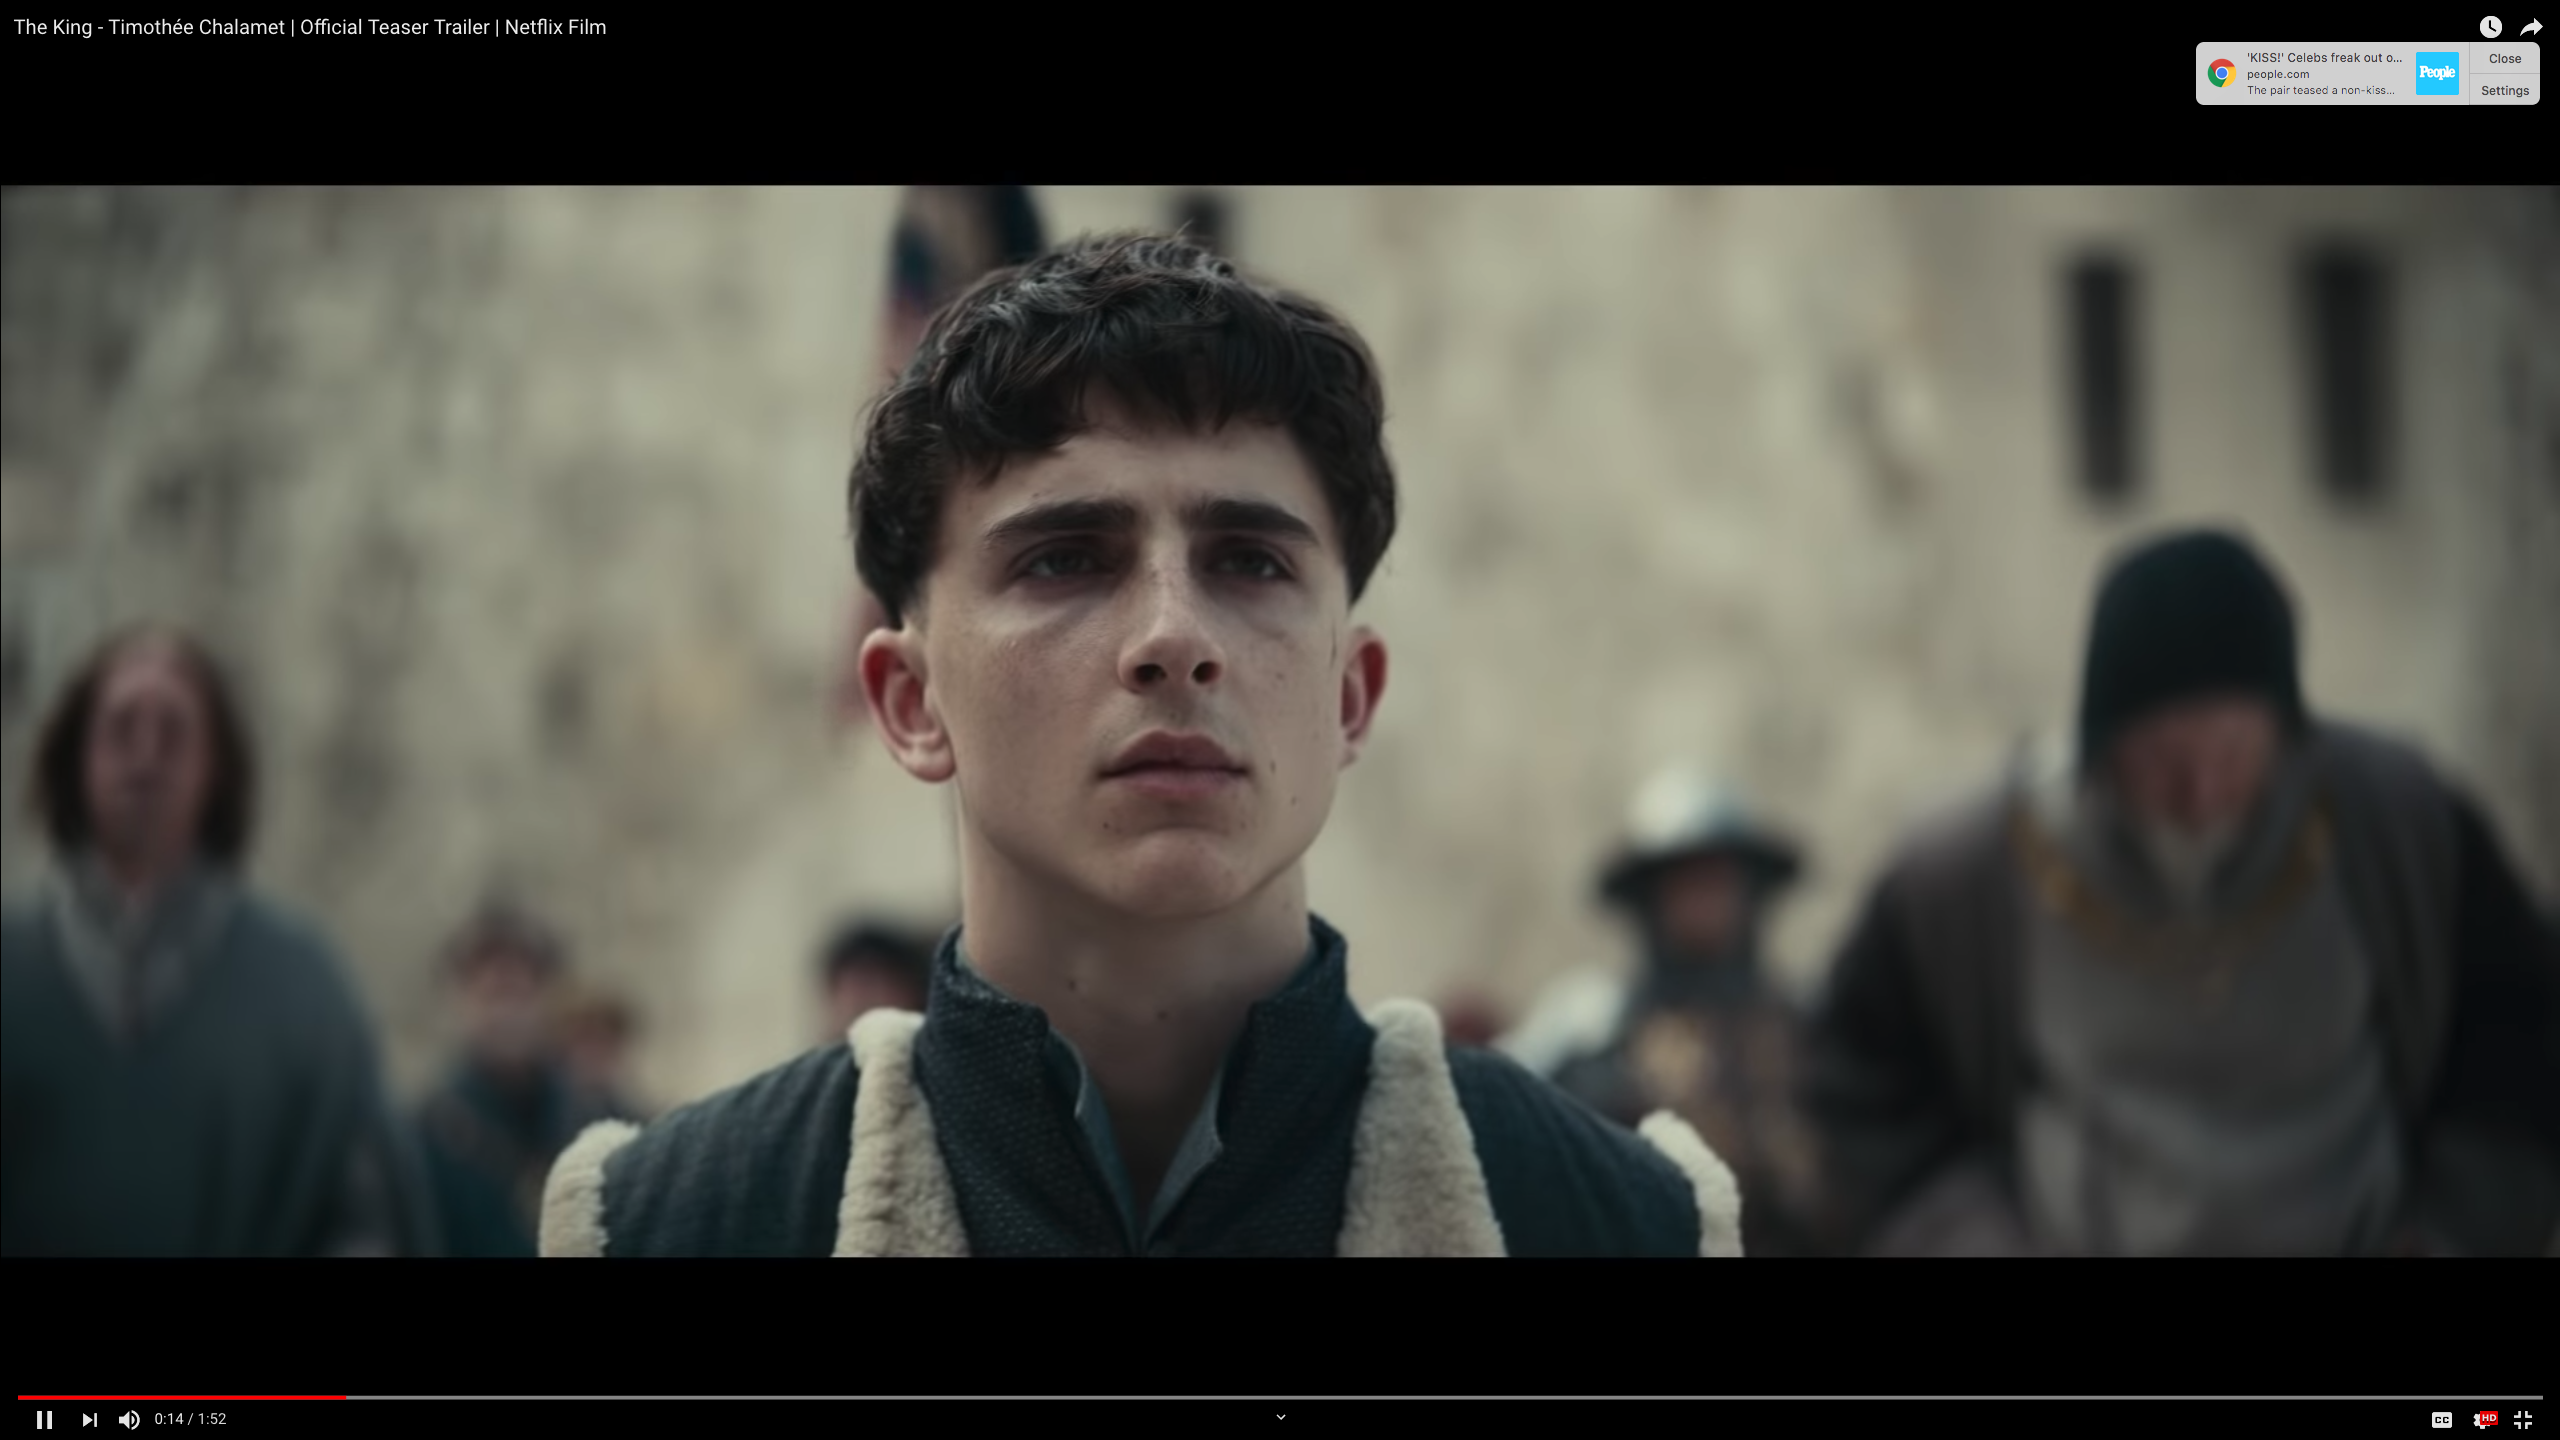 Take A First Look At 'Dune' Featuring Timothée Chalamet | Heartland  Communications Group WNWX